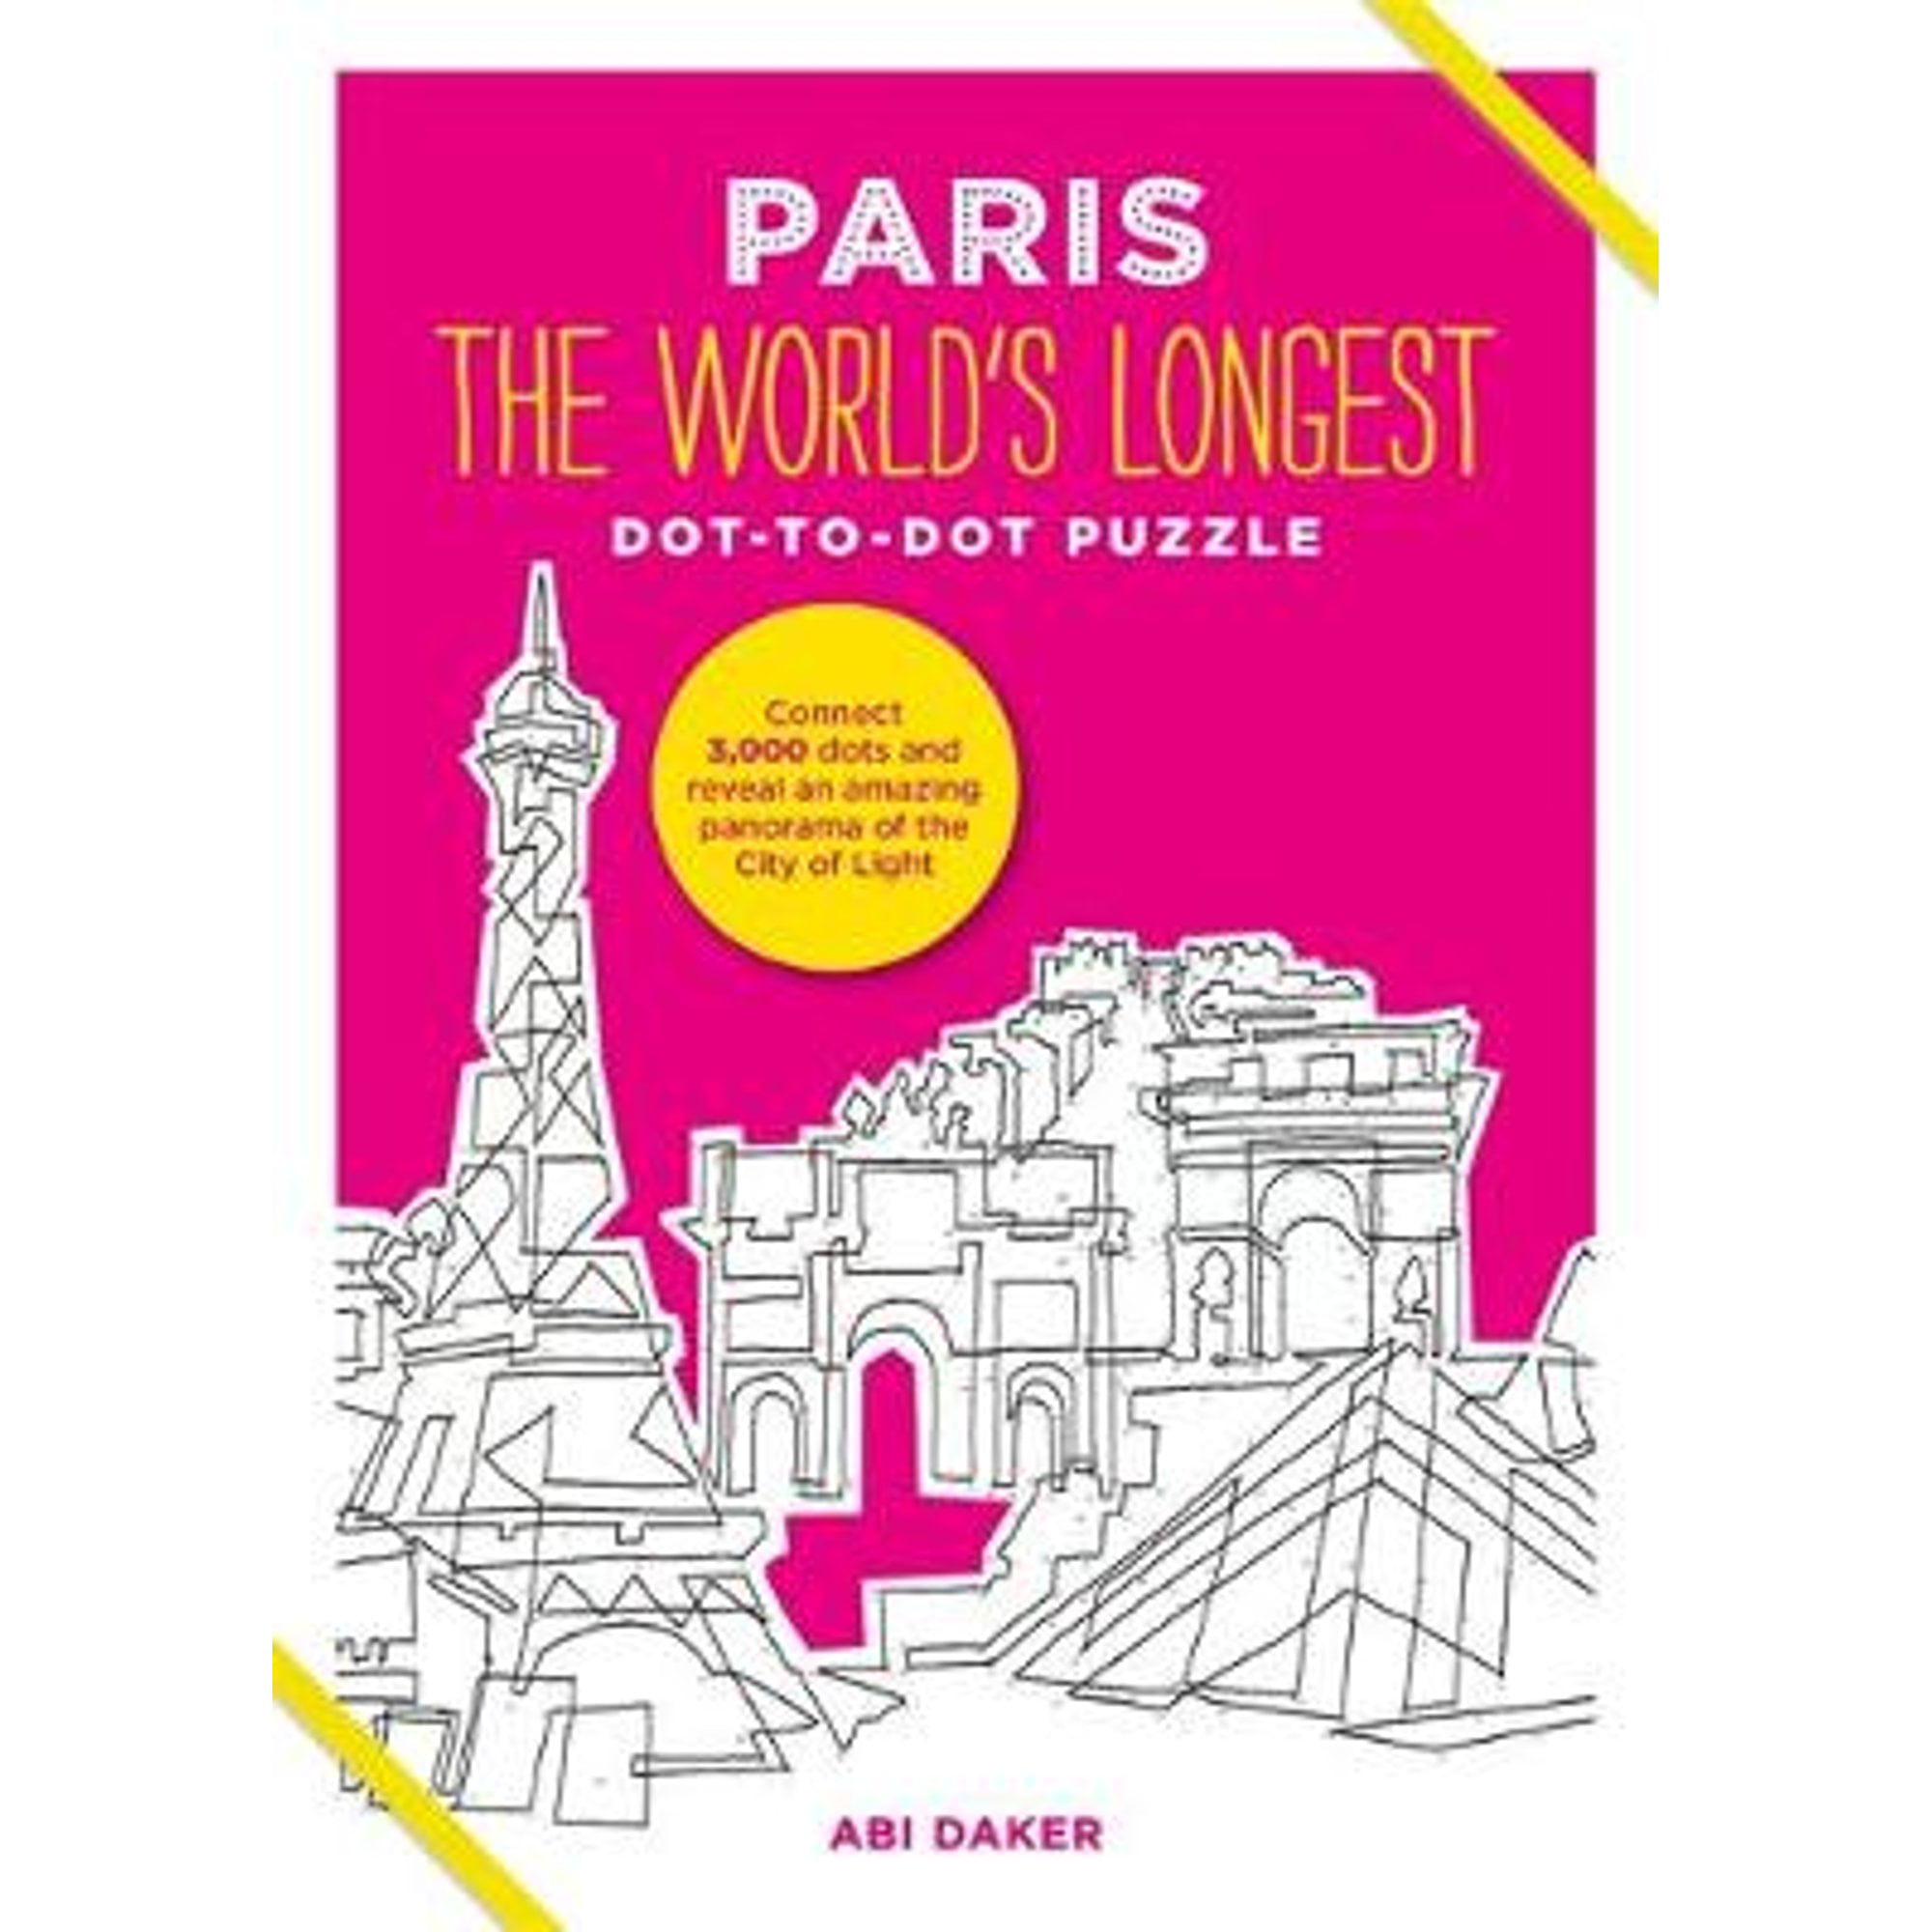 Pre-Owned PARIS The World's Longest Dot-to-Dot Puzzle (Hardcover 9781781573662) by Abi Daker